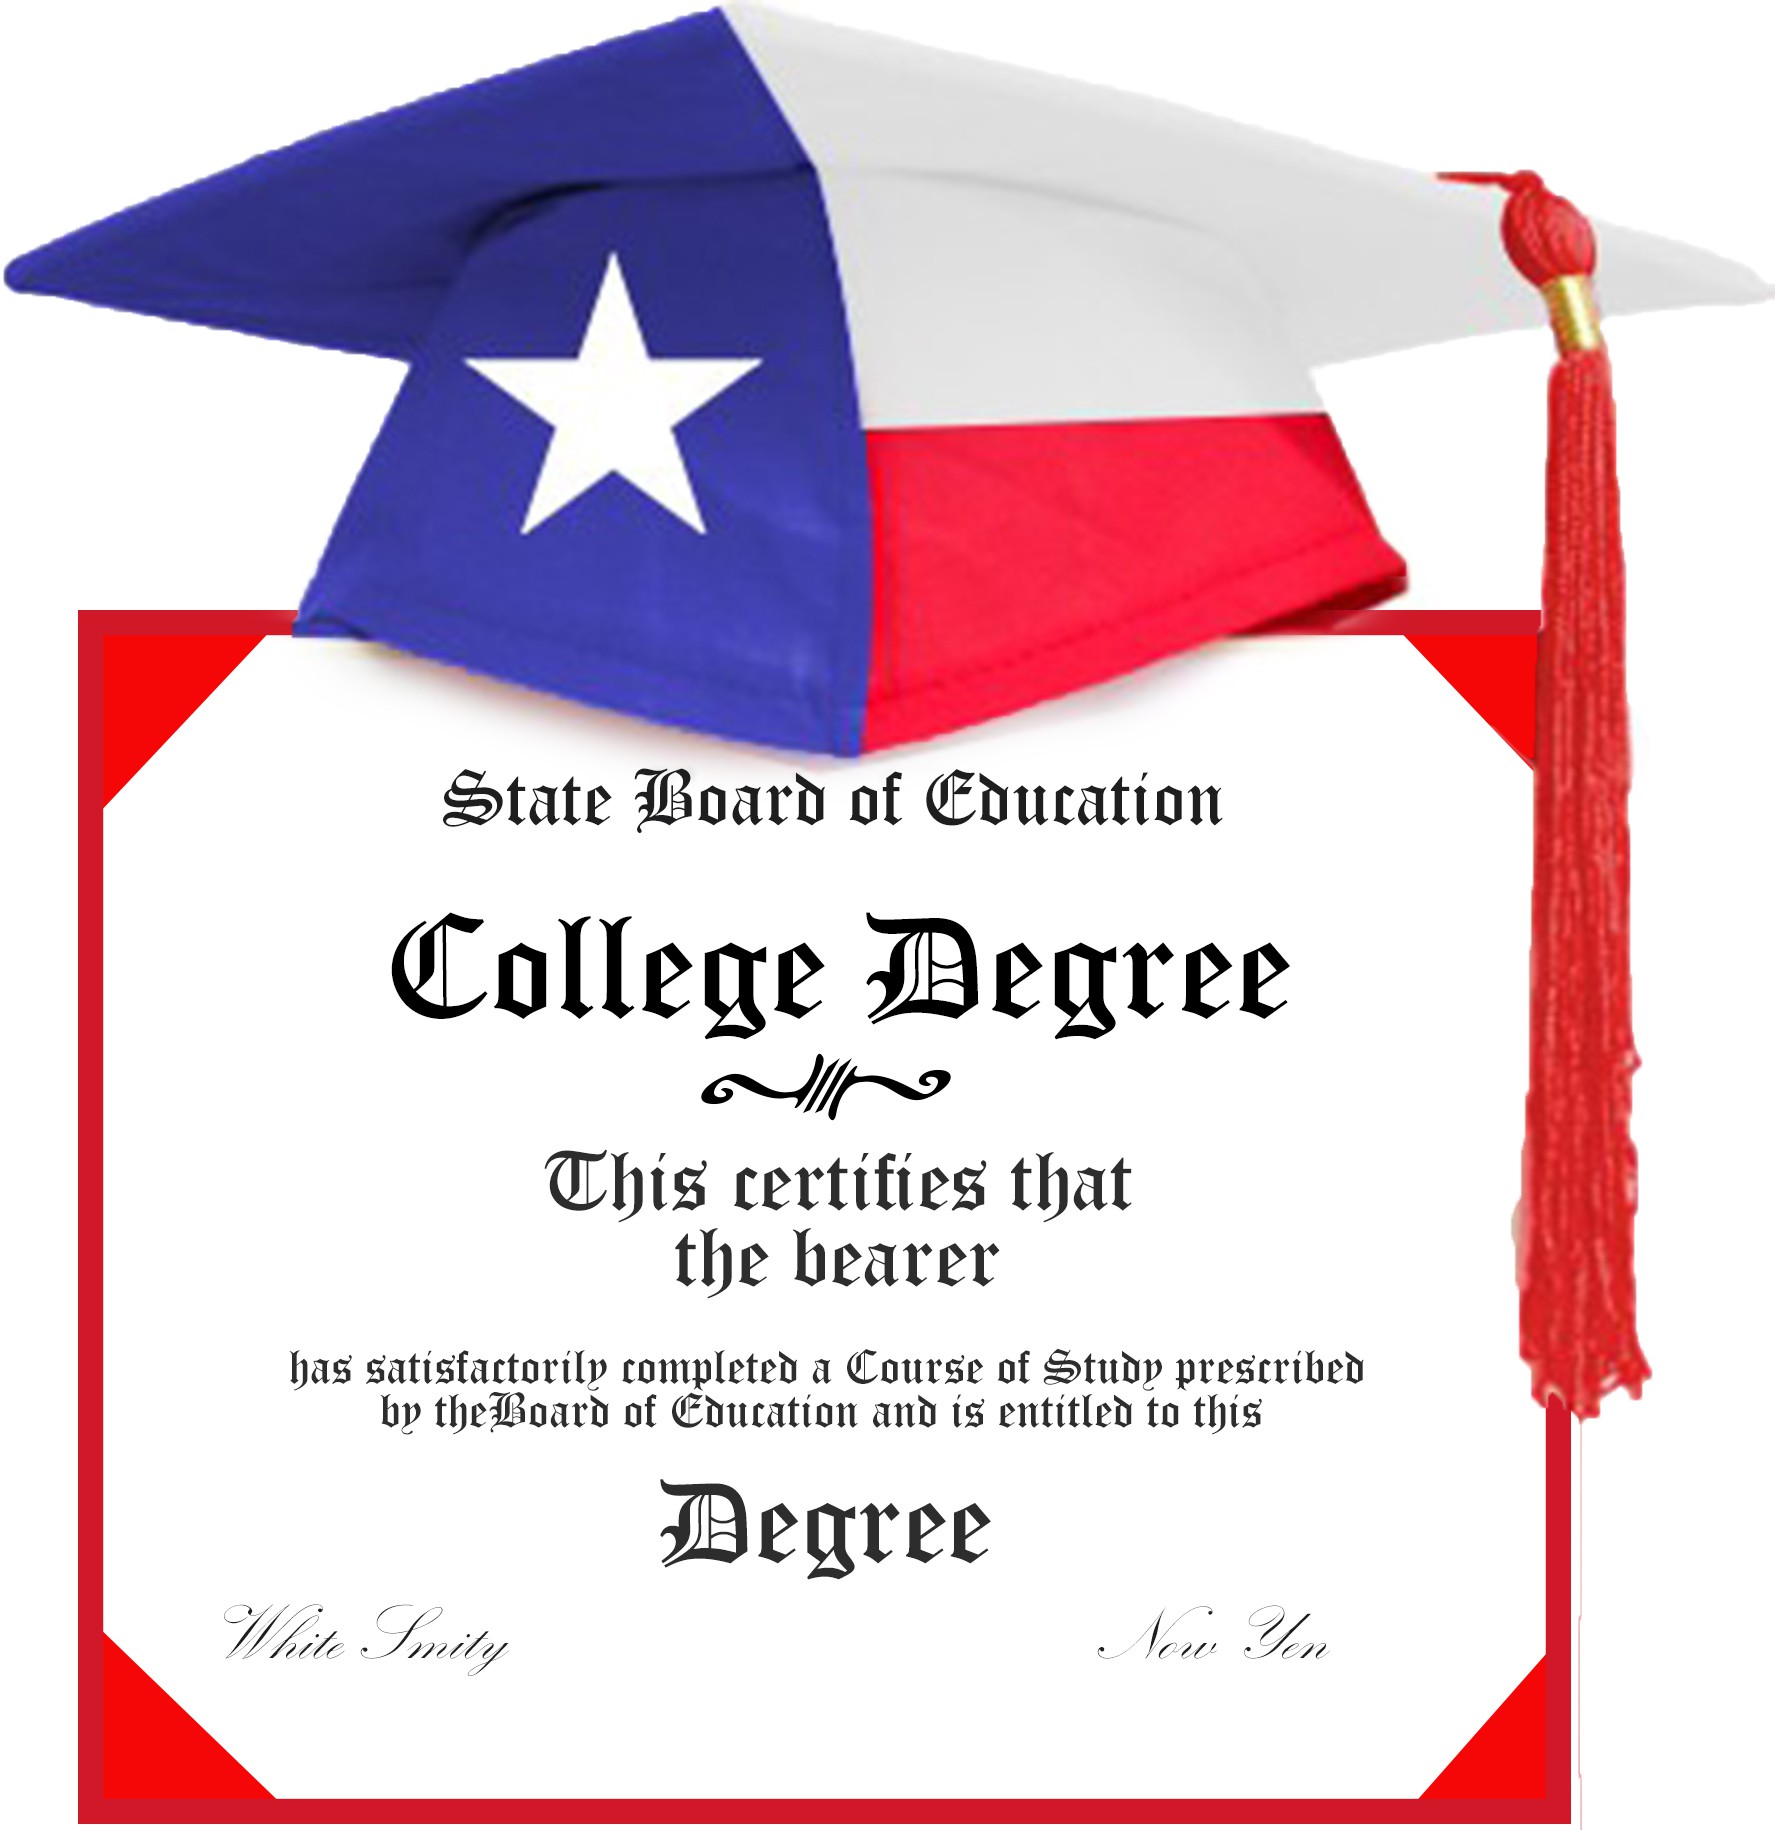 The University of Texas MD Anderson Cancer Center College Degree